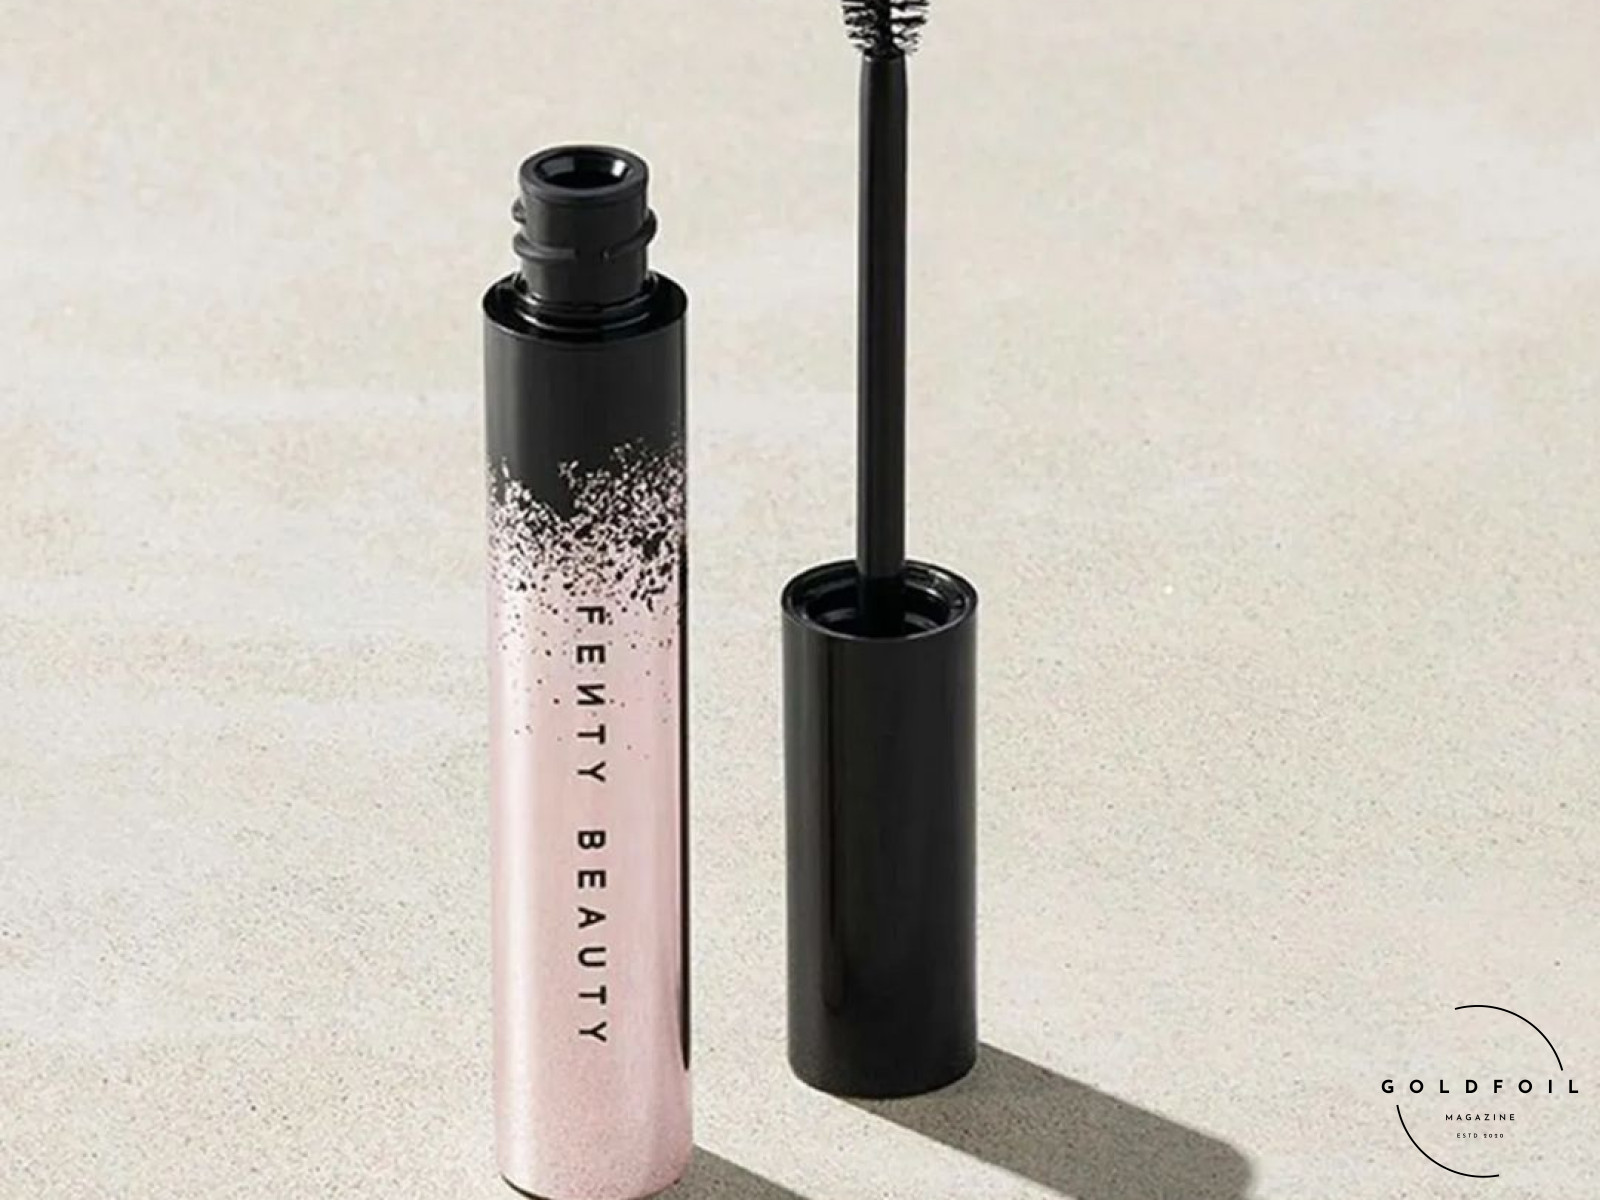 Fenty Beauty - Hella Thicc Mascara - One of the best Mascaras you must try